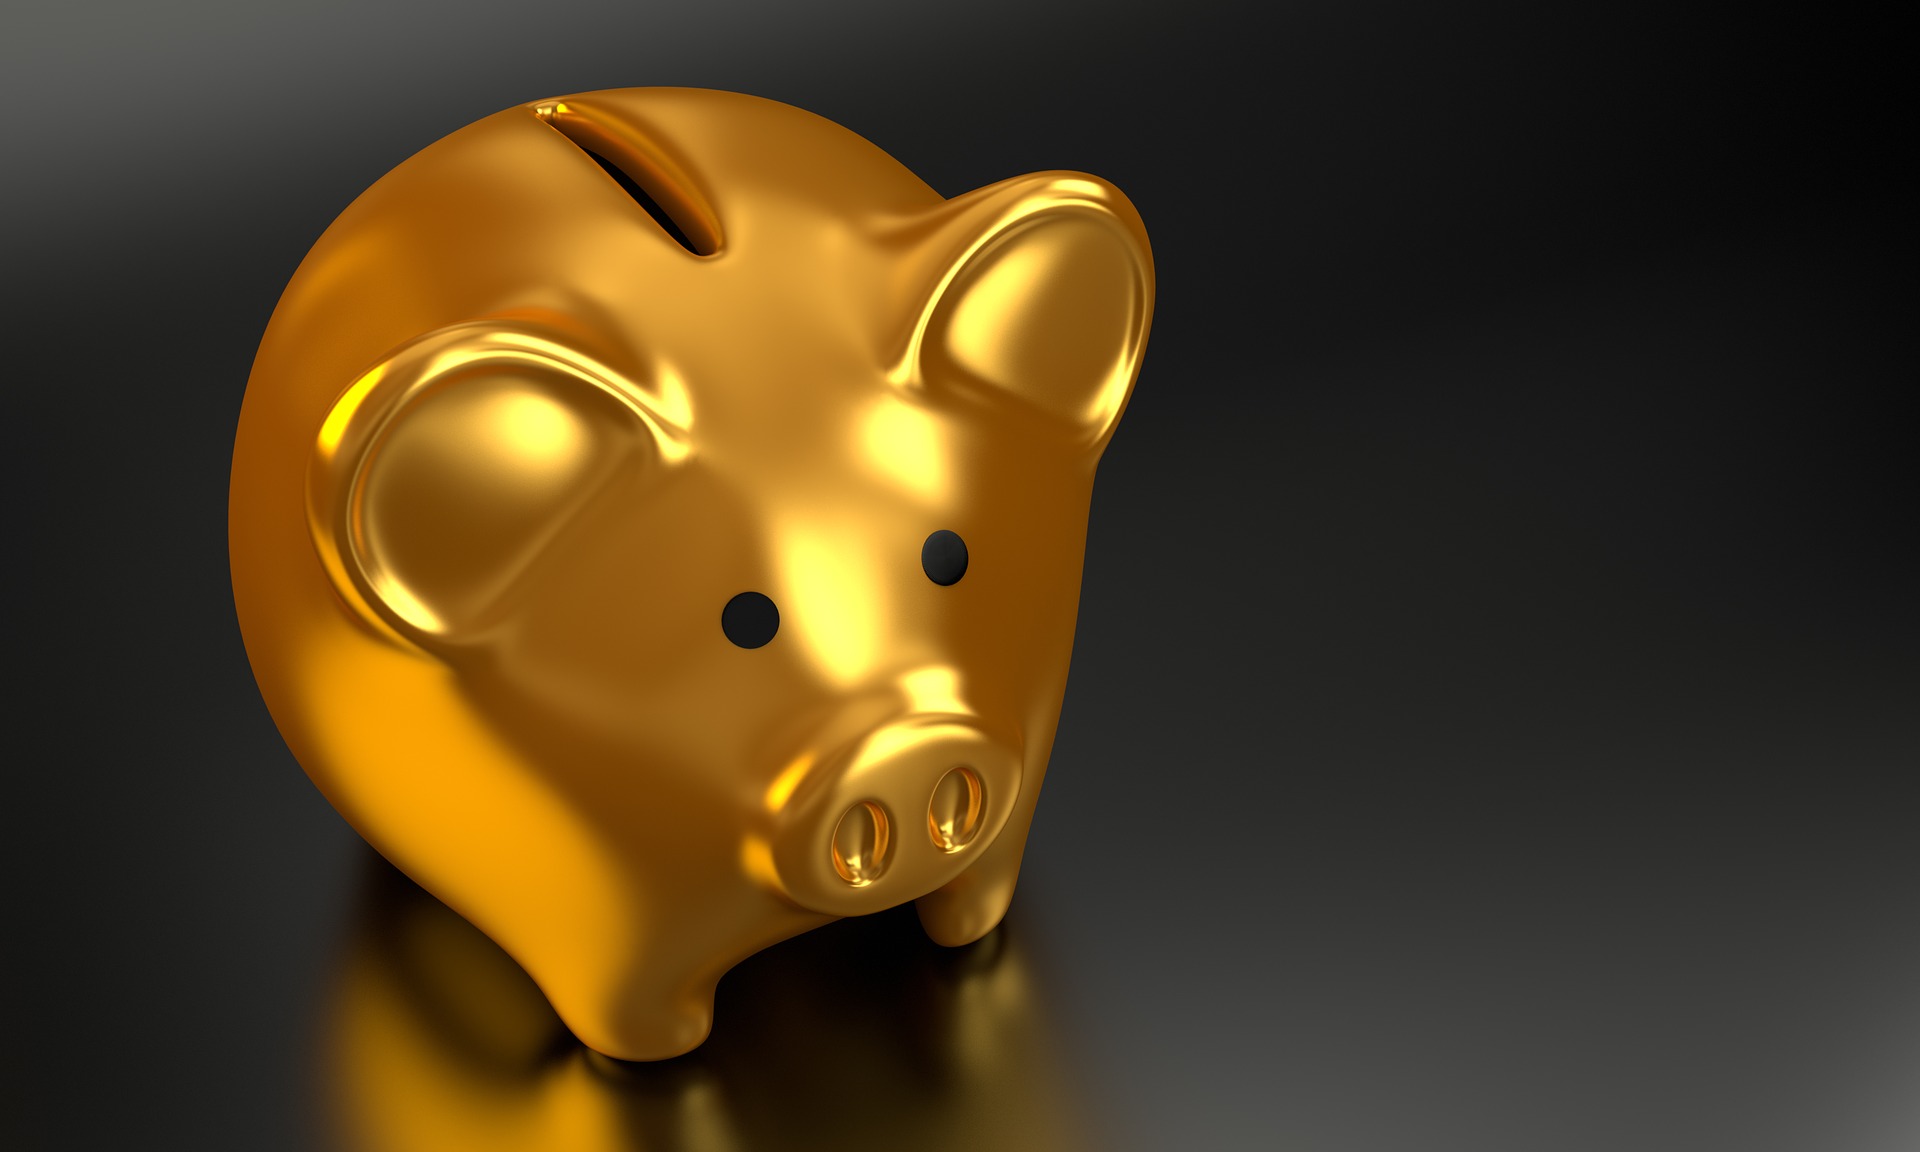 picture of gold piggy bank against black background